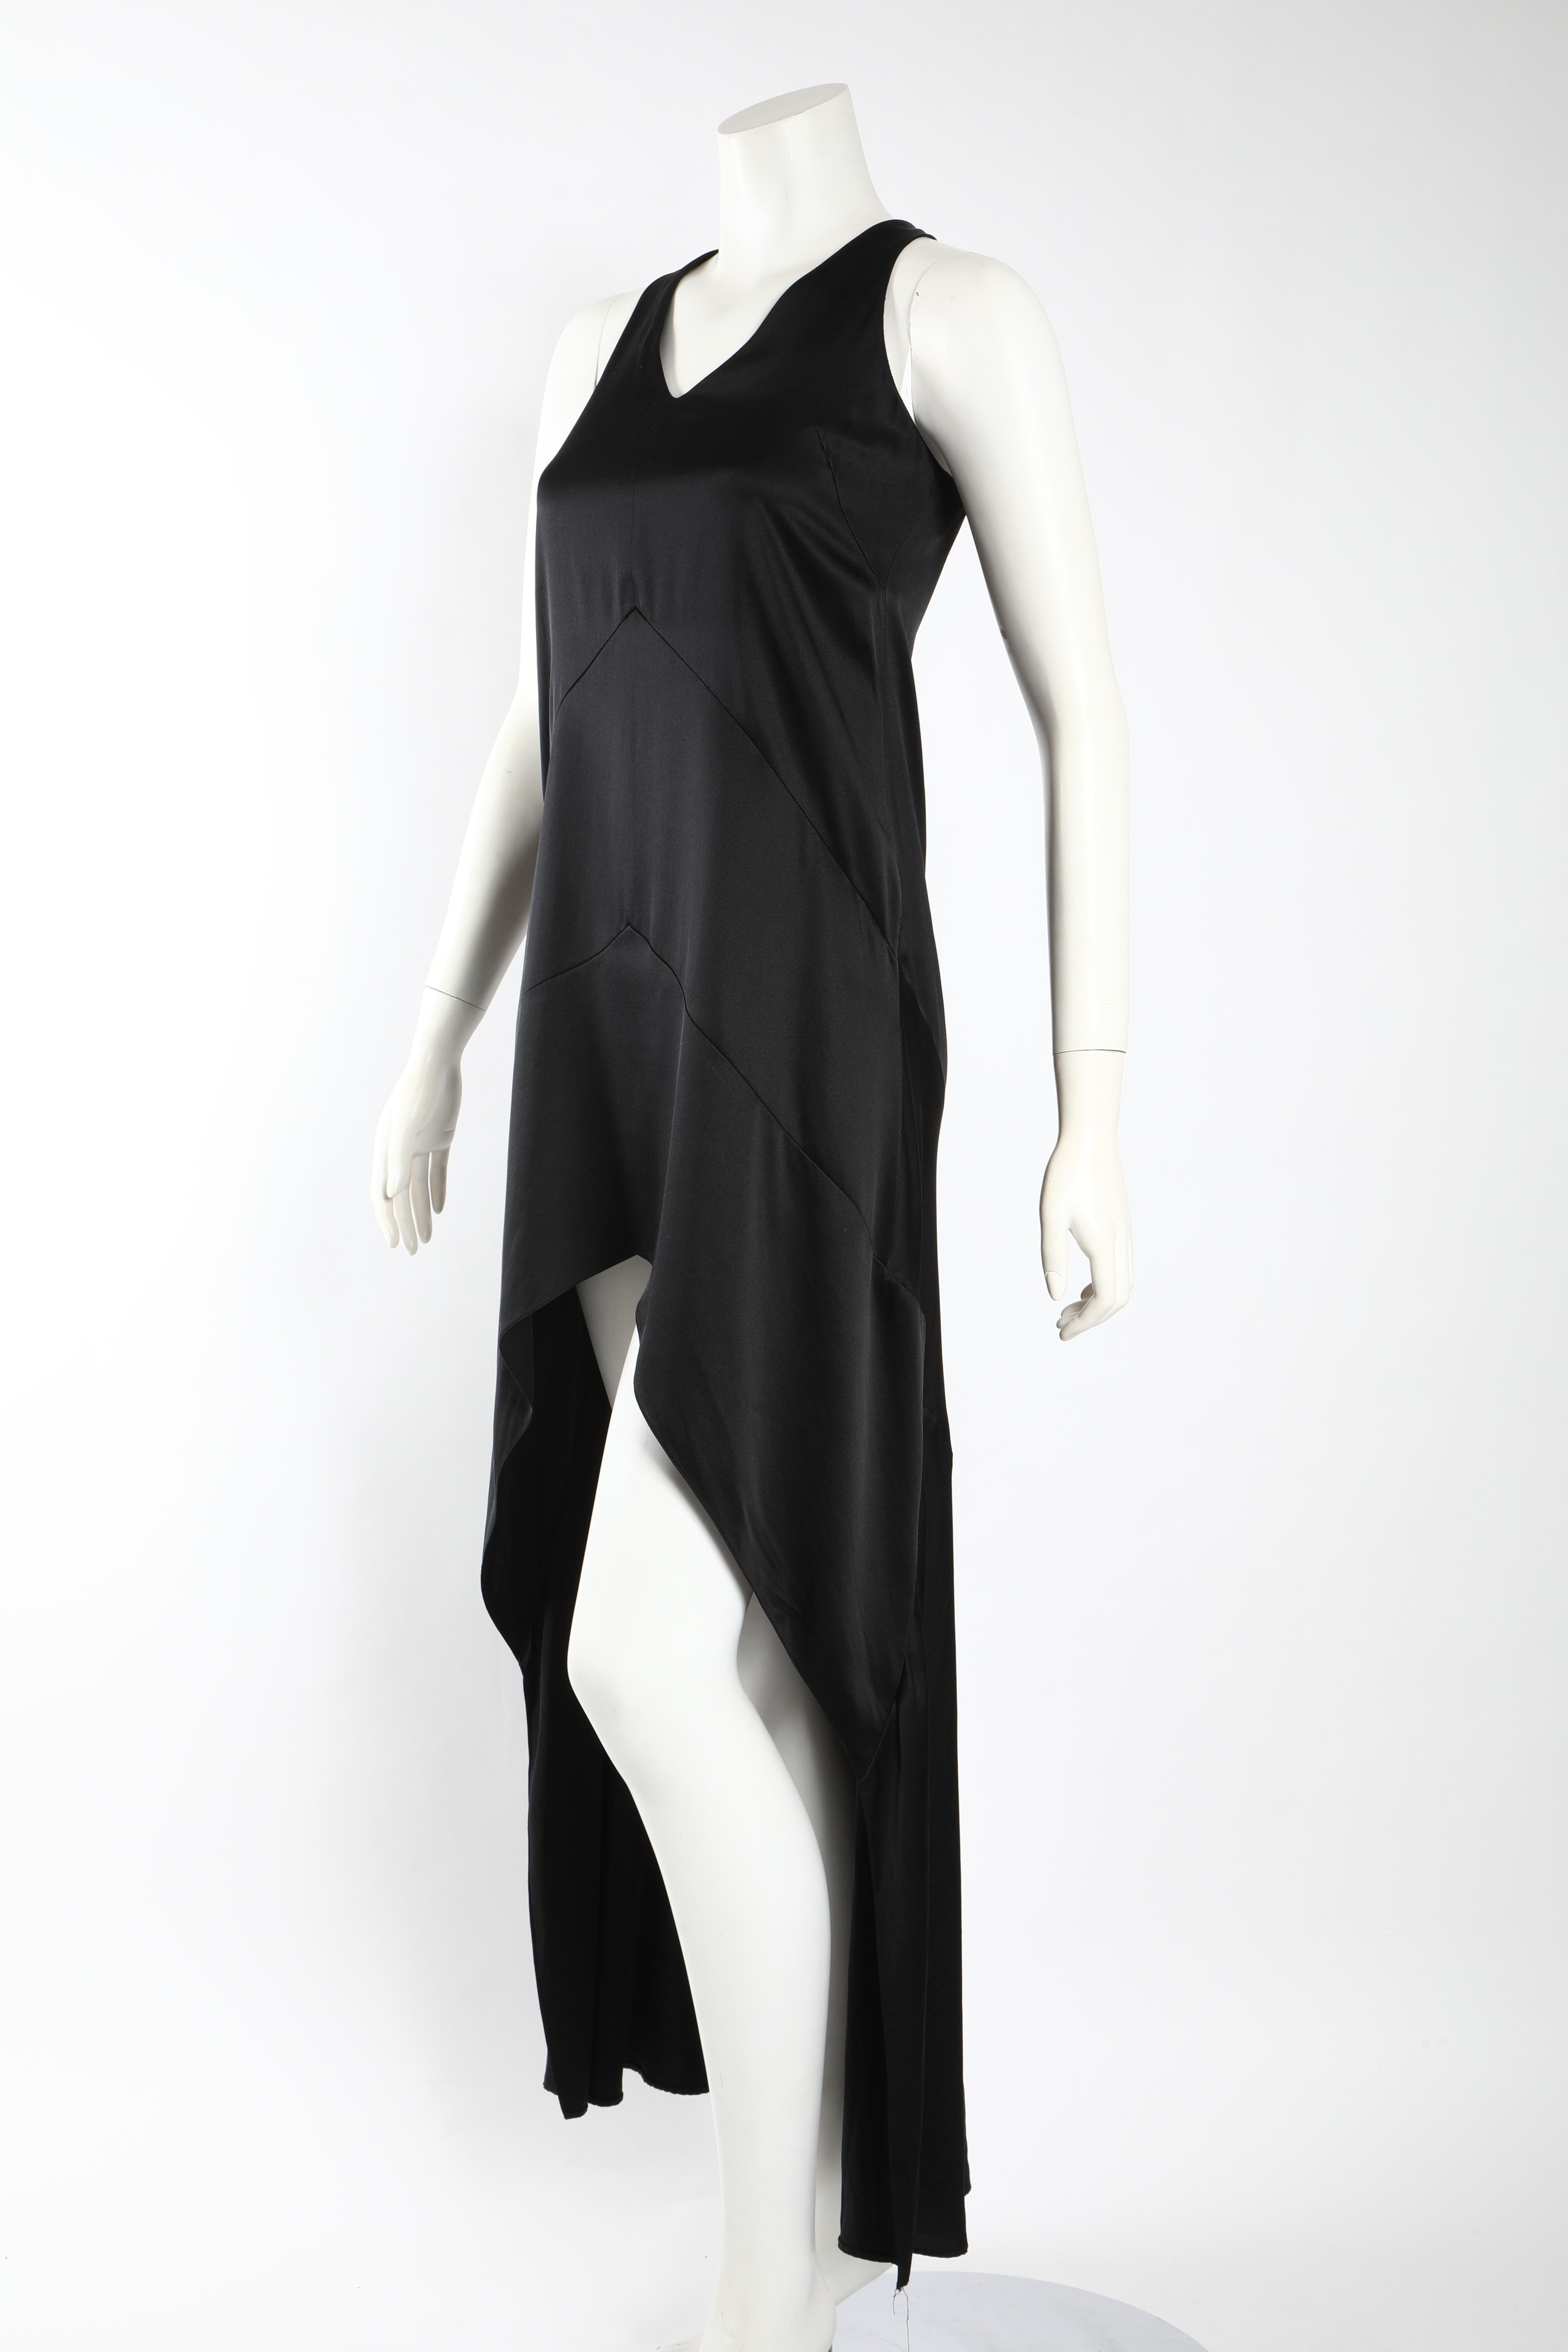 Simple black silk slip dress by Narciso Rodriguez with an extreme high-low hem and v-neck.  A simple and chic addition to any wardrobe. Size 4. 